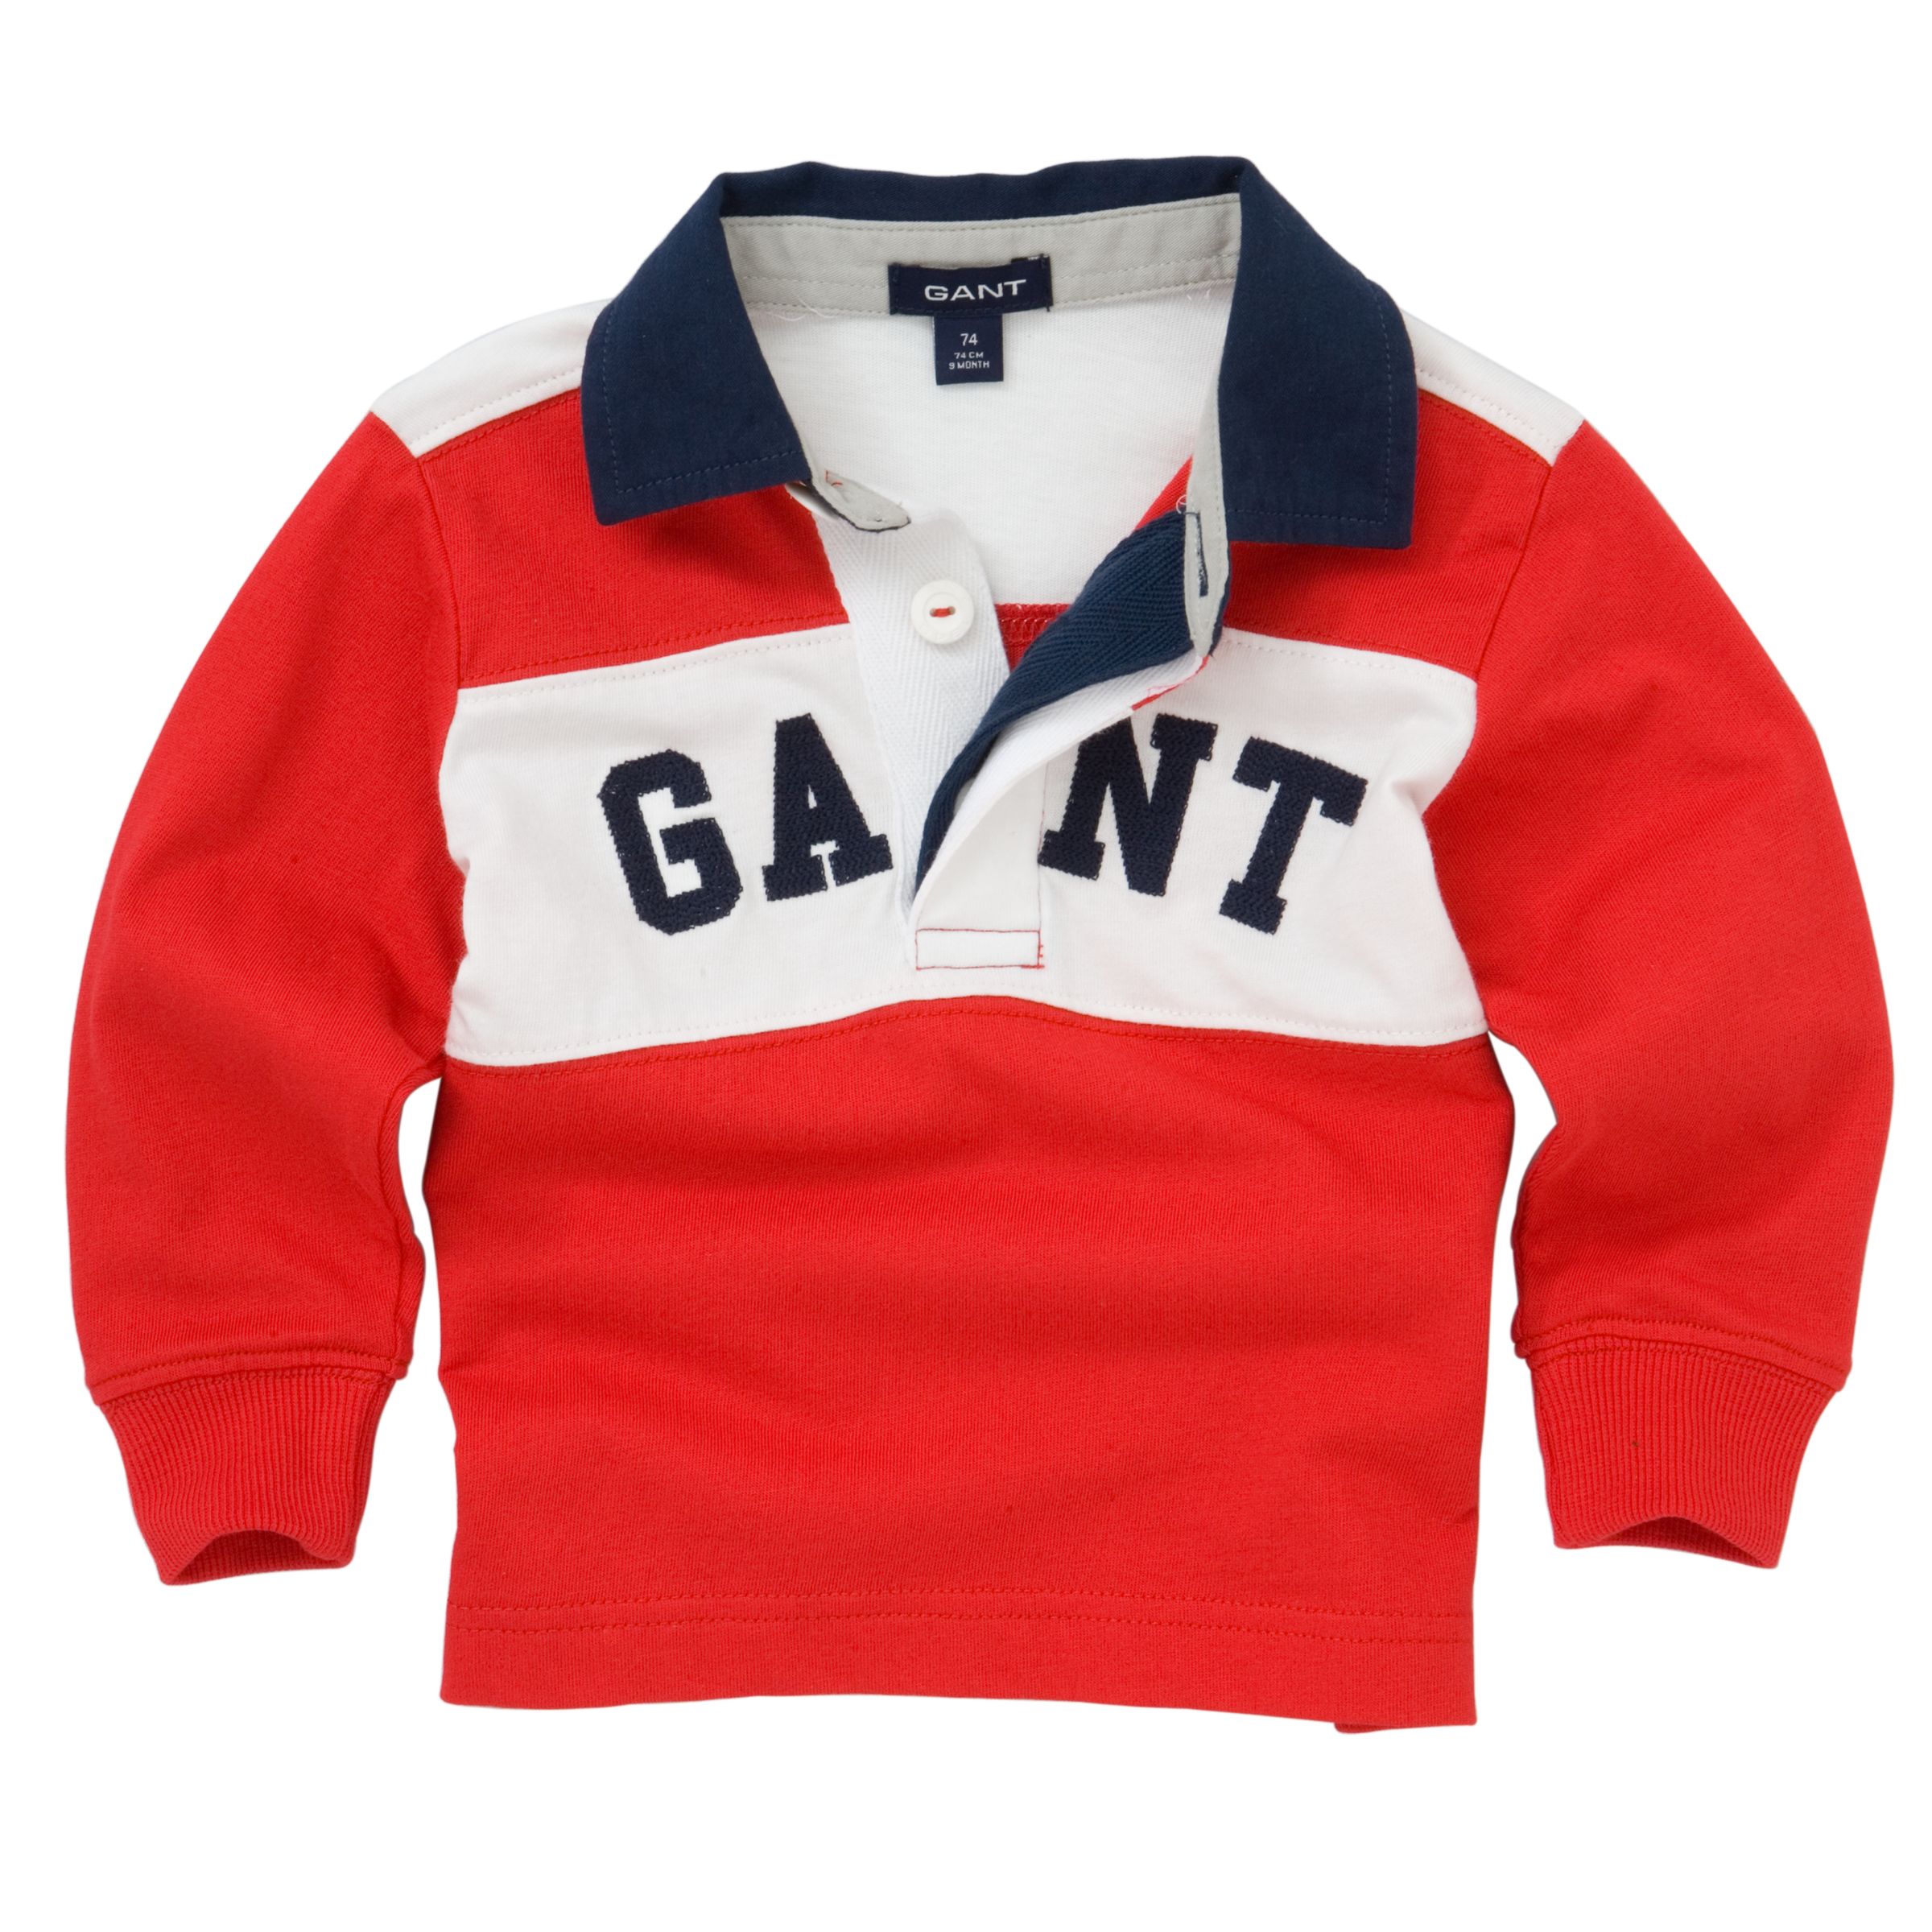 Gant Rugby Shirt, Red